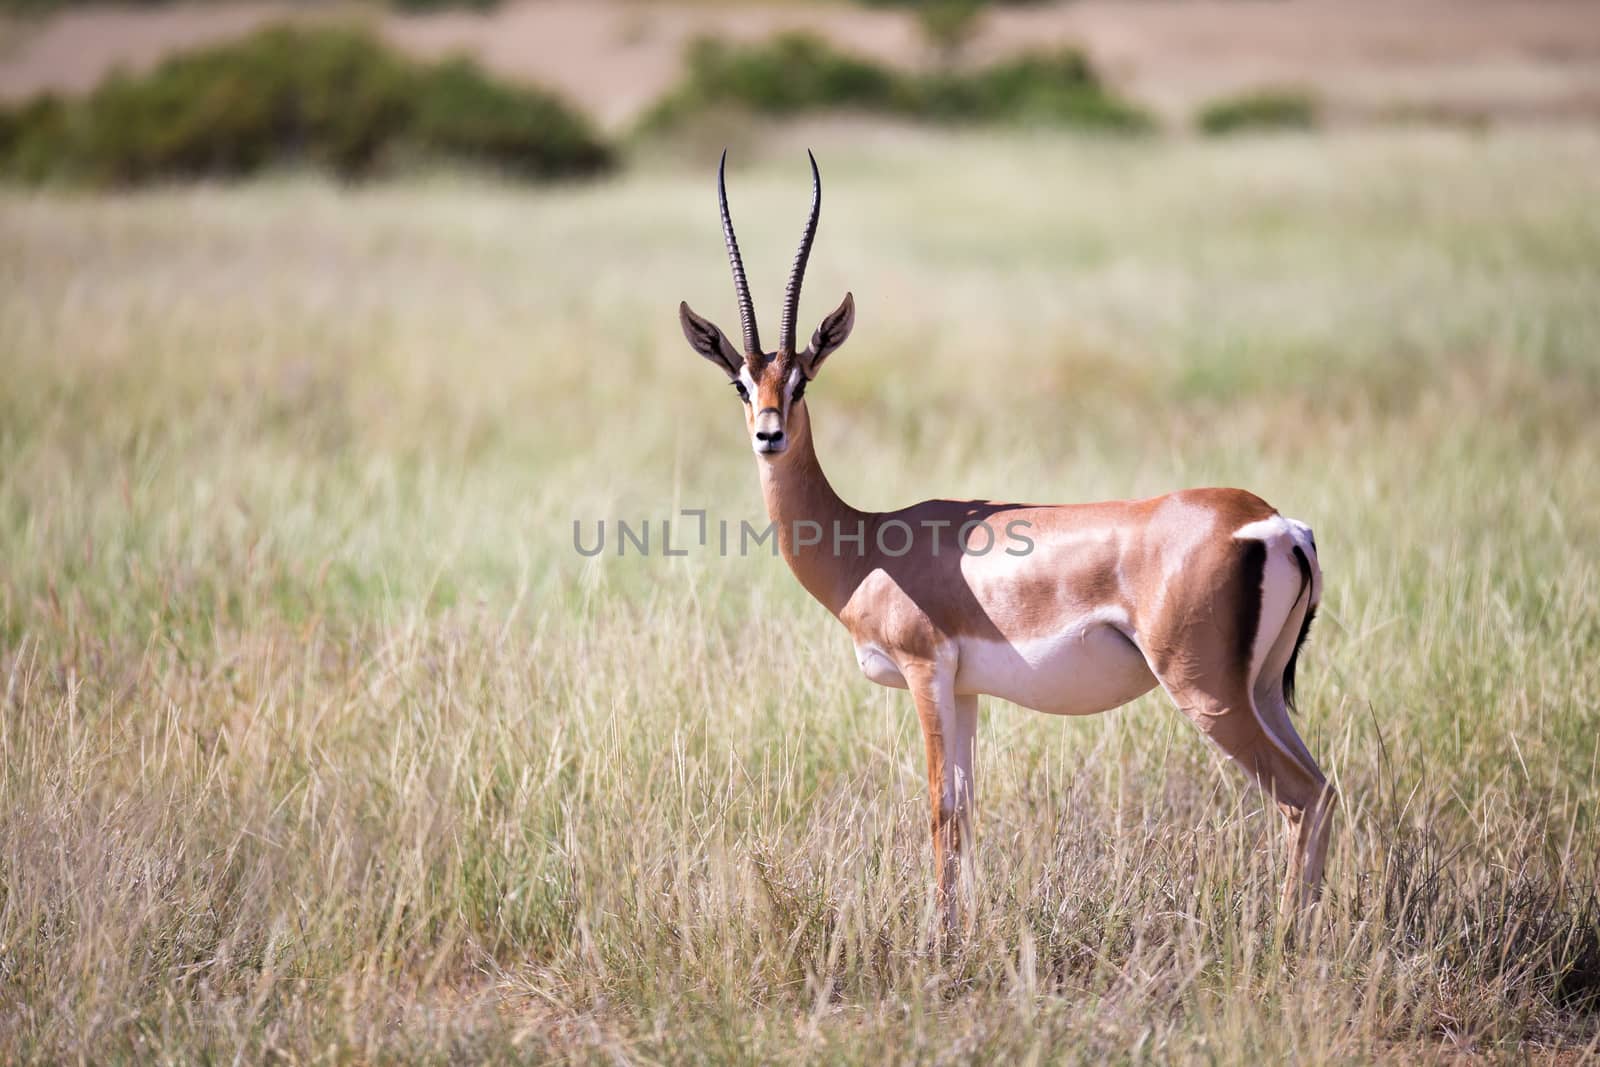 The antelopes in the grass landscape of Kenya